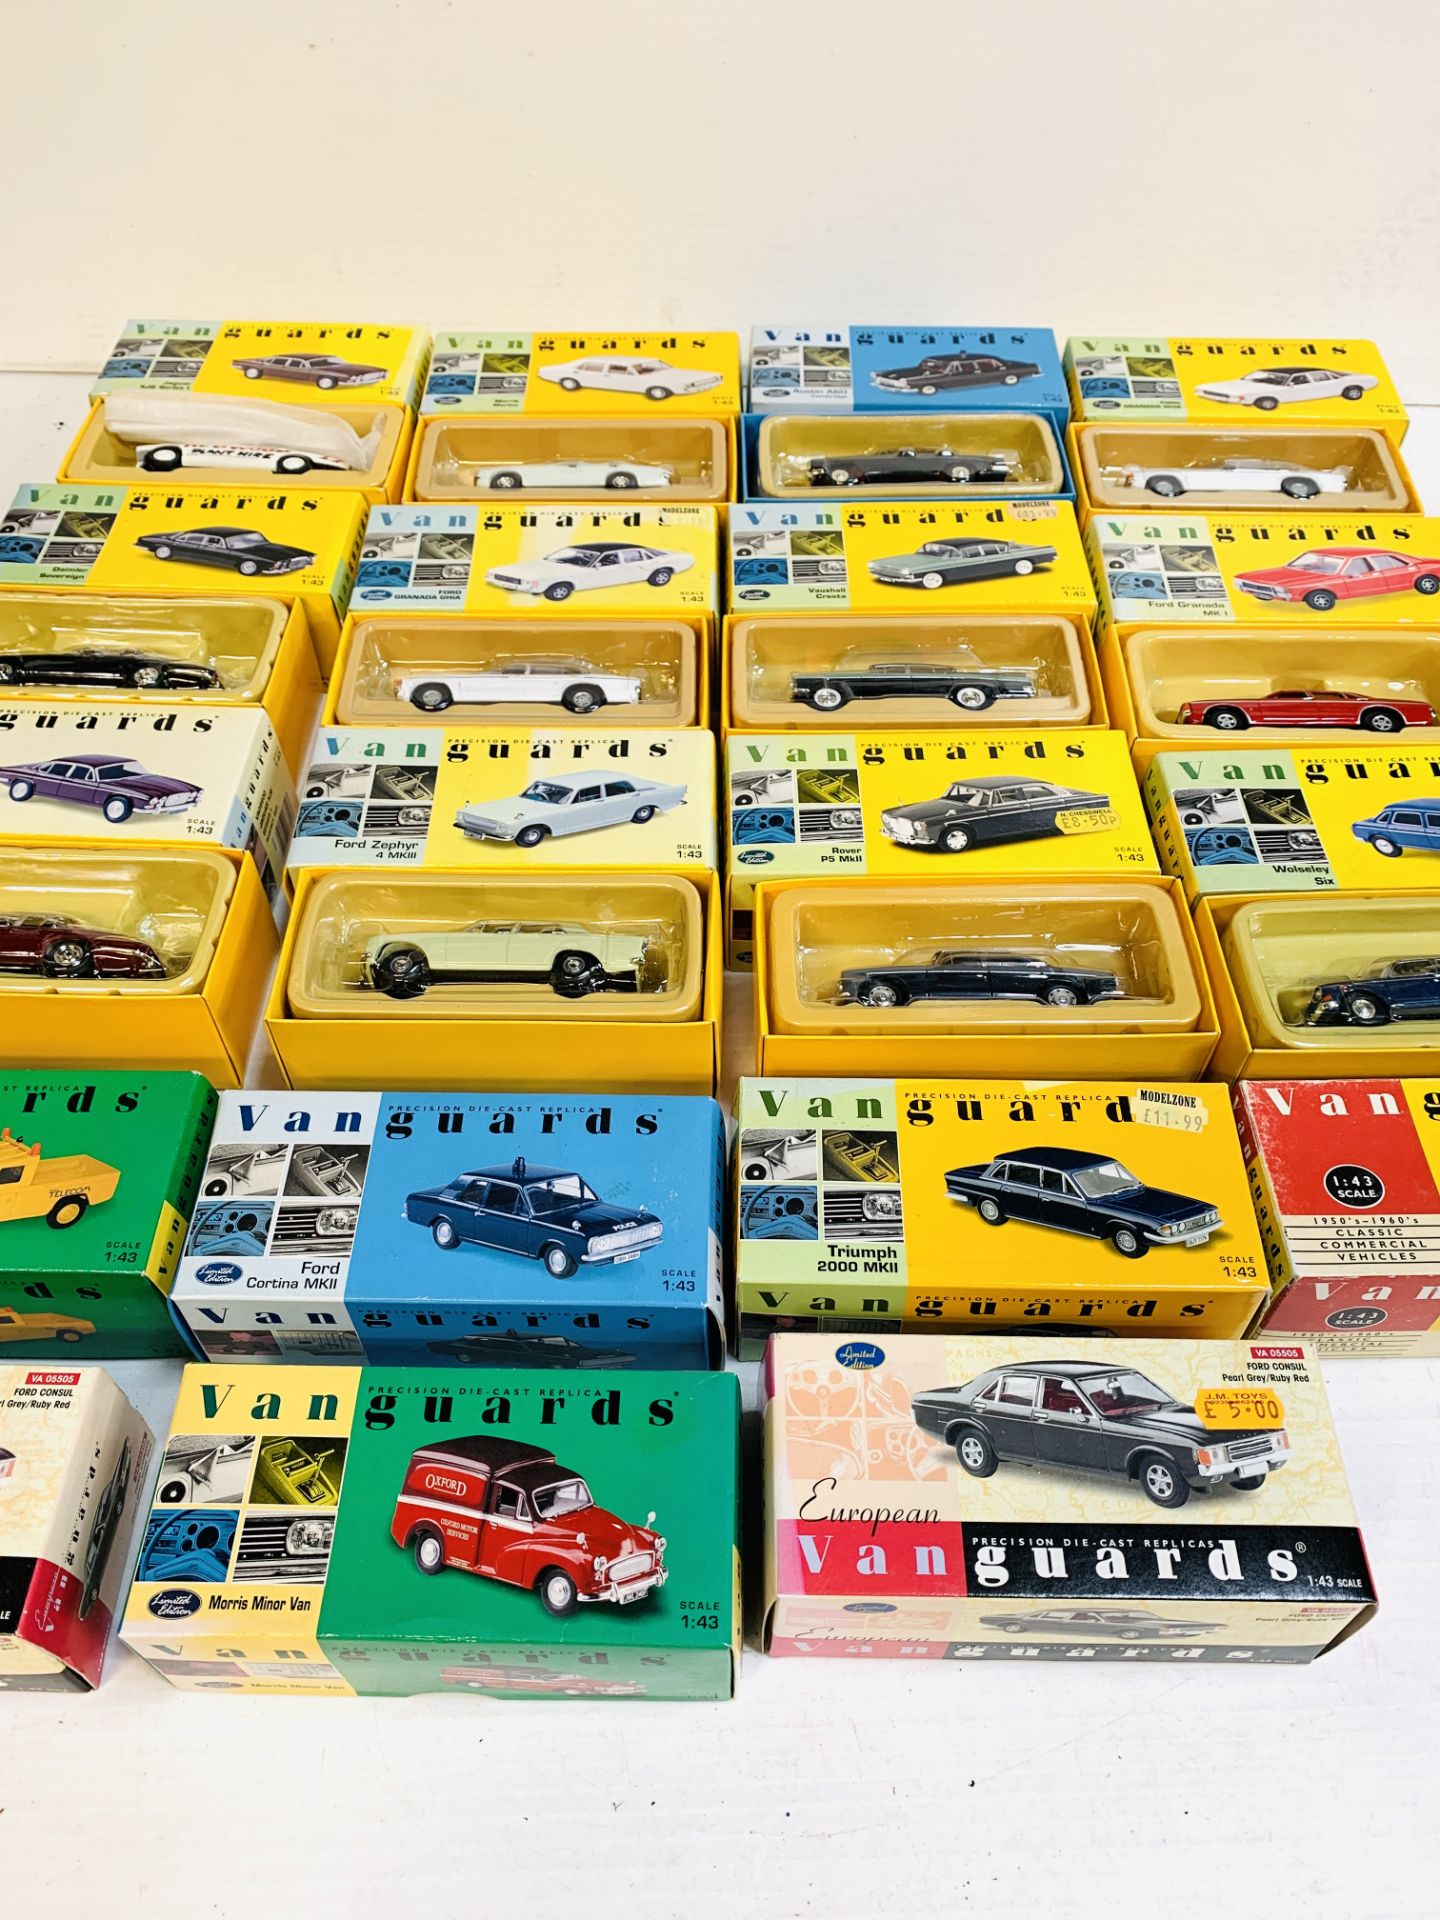 Nineteen boxed Vanguards diecast model cars and vans.